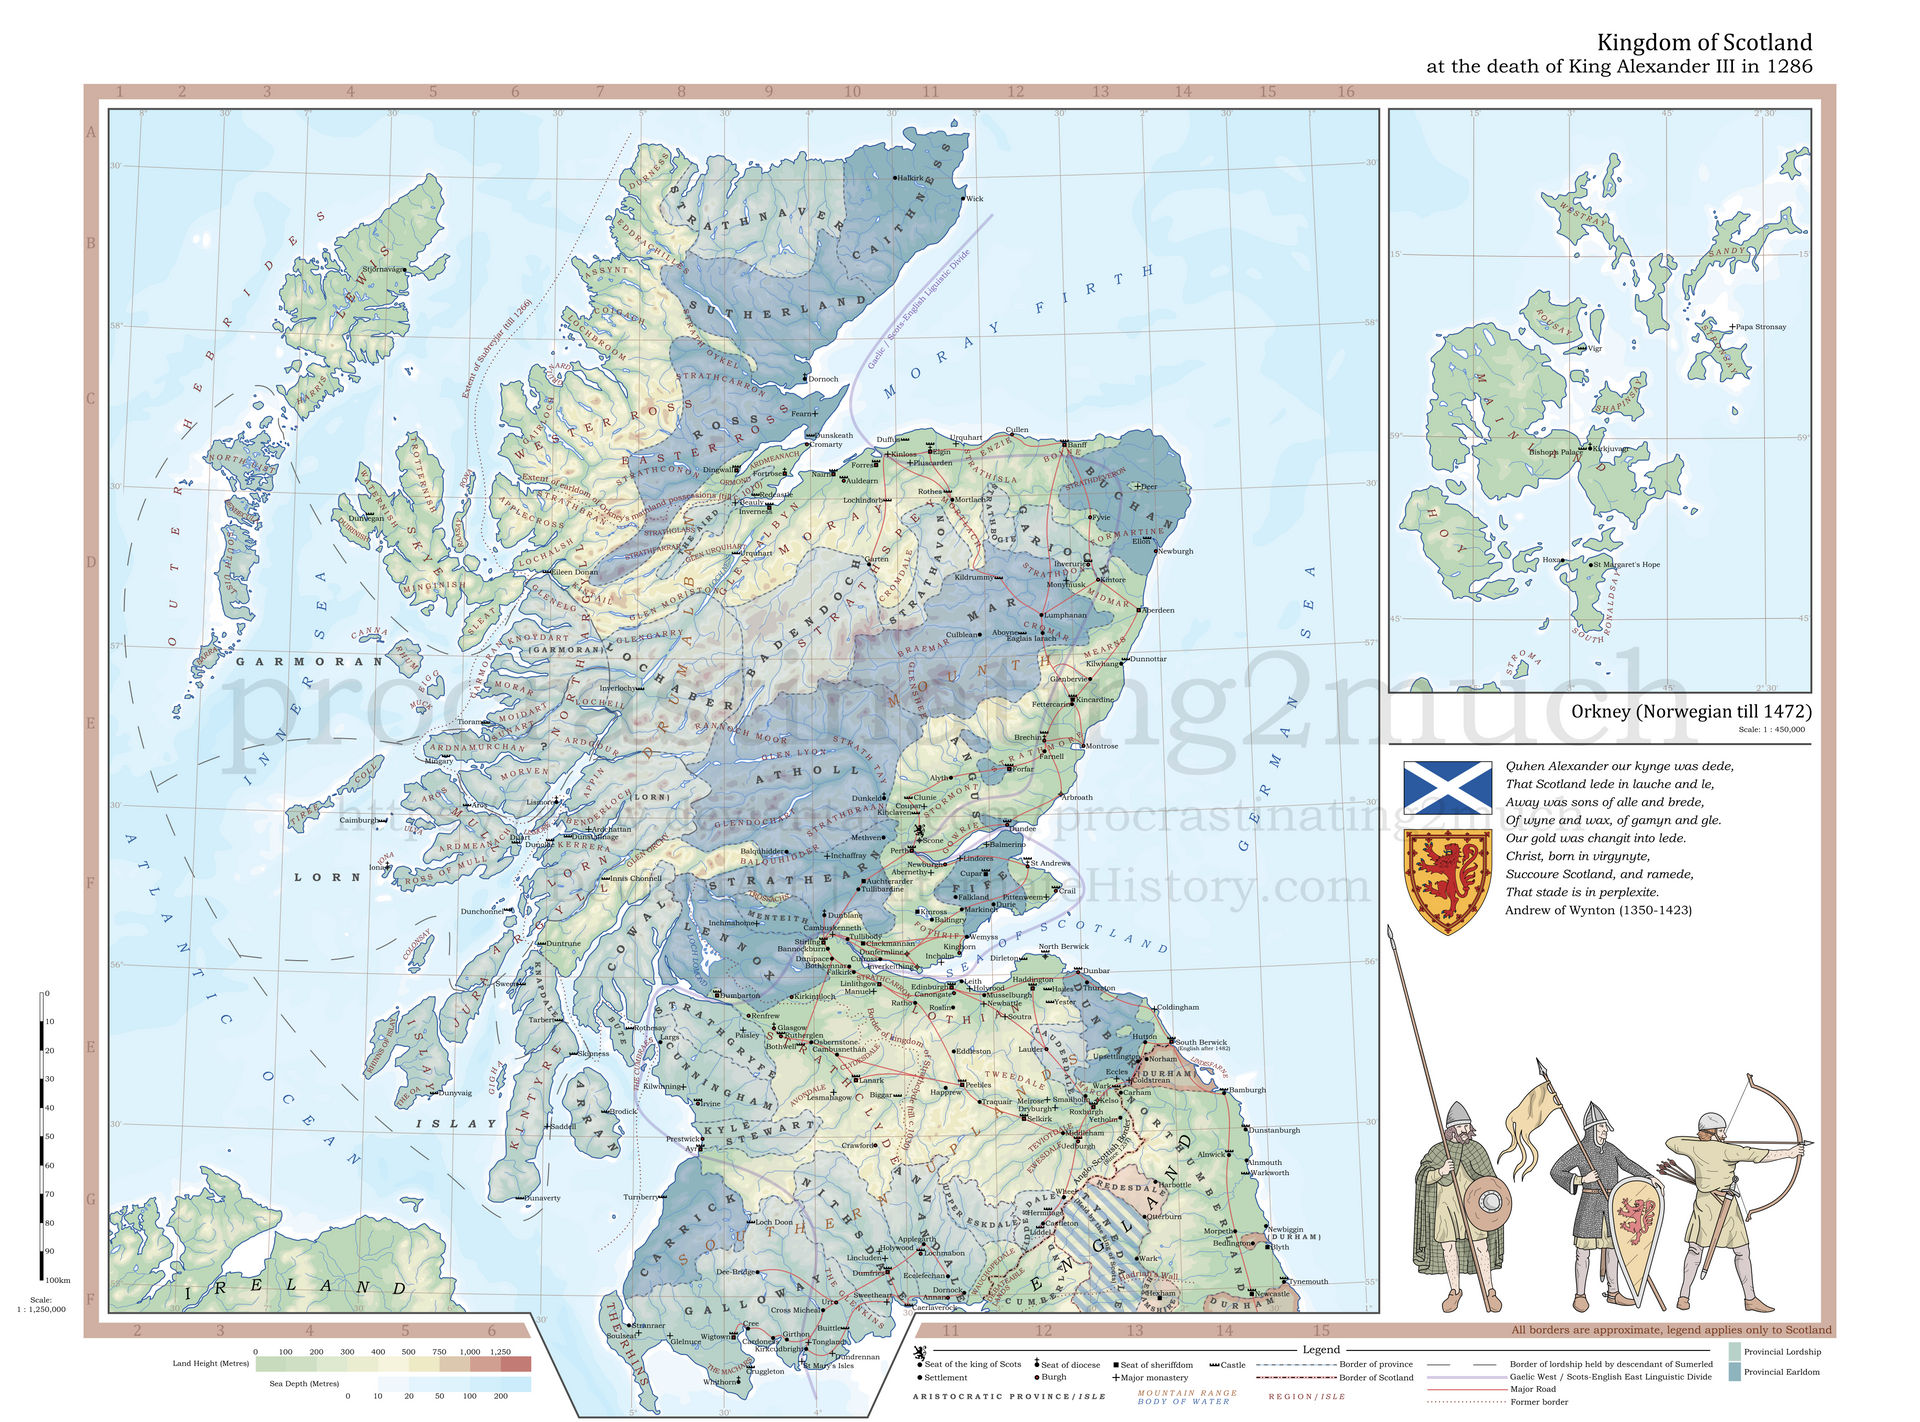 kingdom_of_scotland_in_1286_by_procrastinating2much_dcuby7w-fullview.jpg